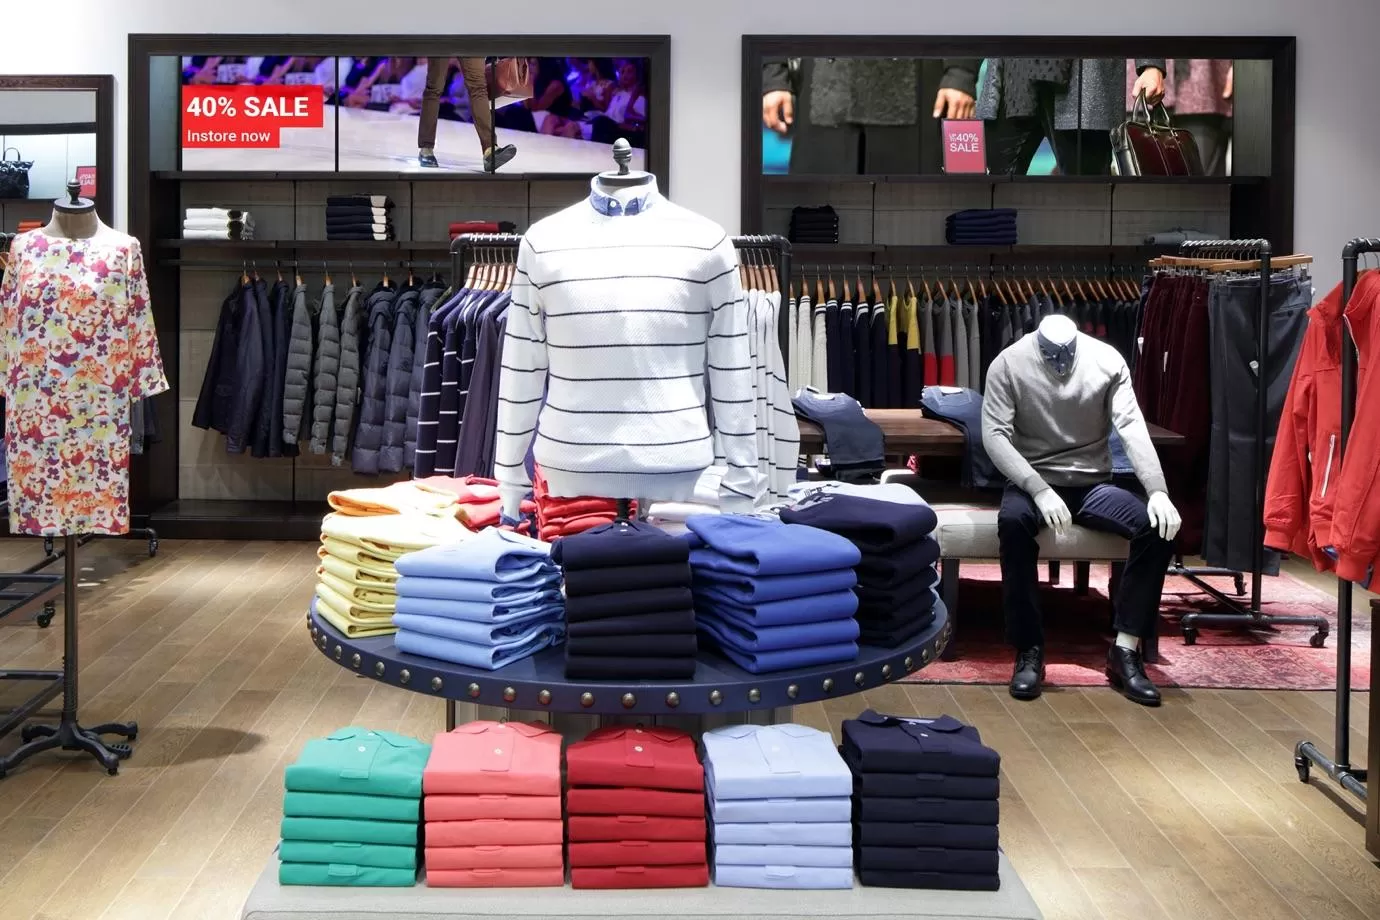 Clothes shop using digital signage to tell customers about a sale